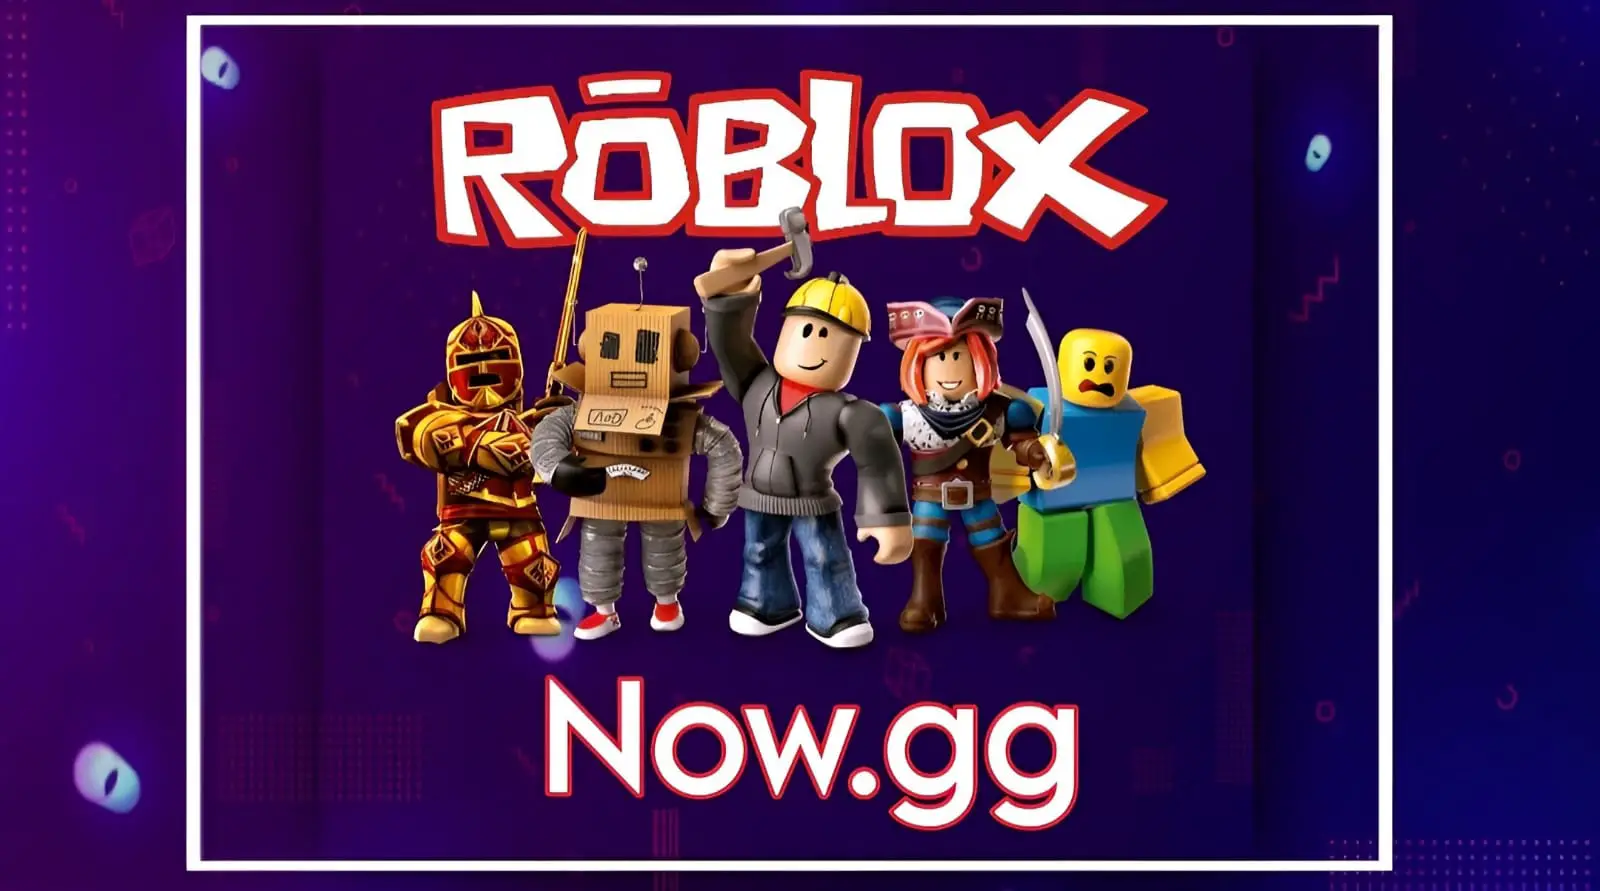 Roblox Now.gg: How to Play Roblox Online Without Having to Download